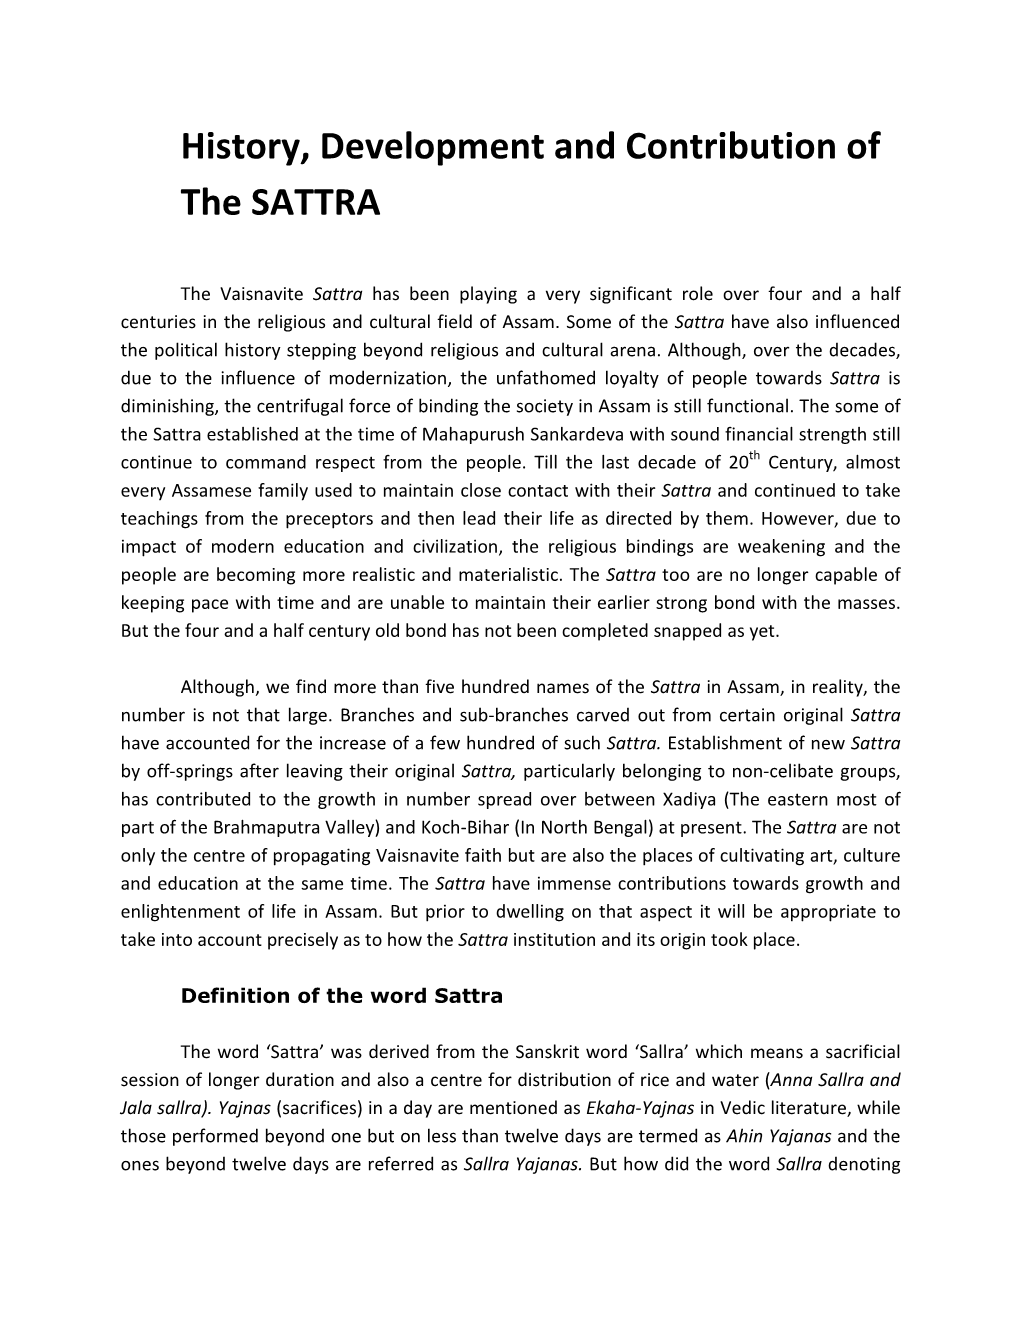 History, Development and Contribution of the SATTRA